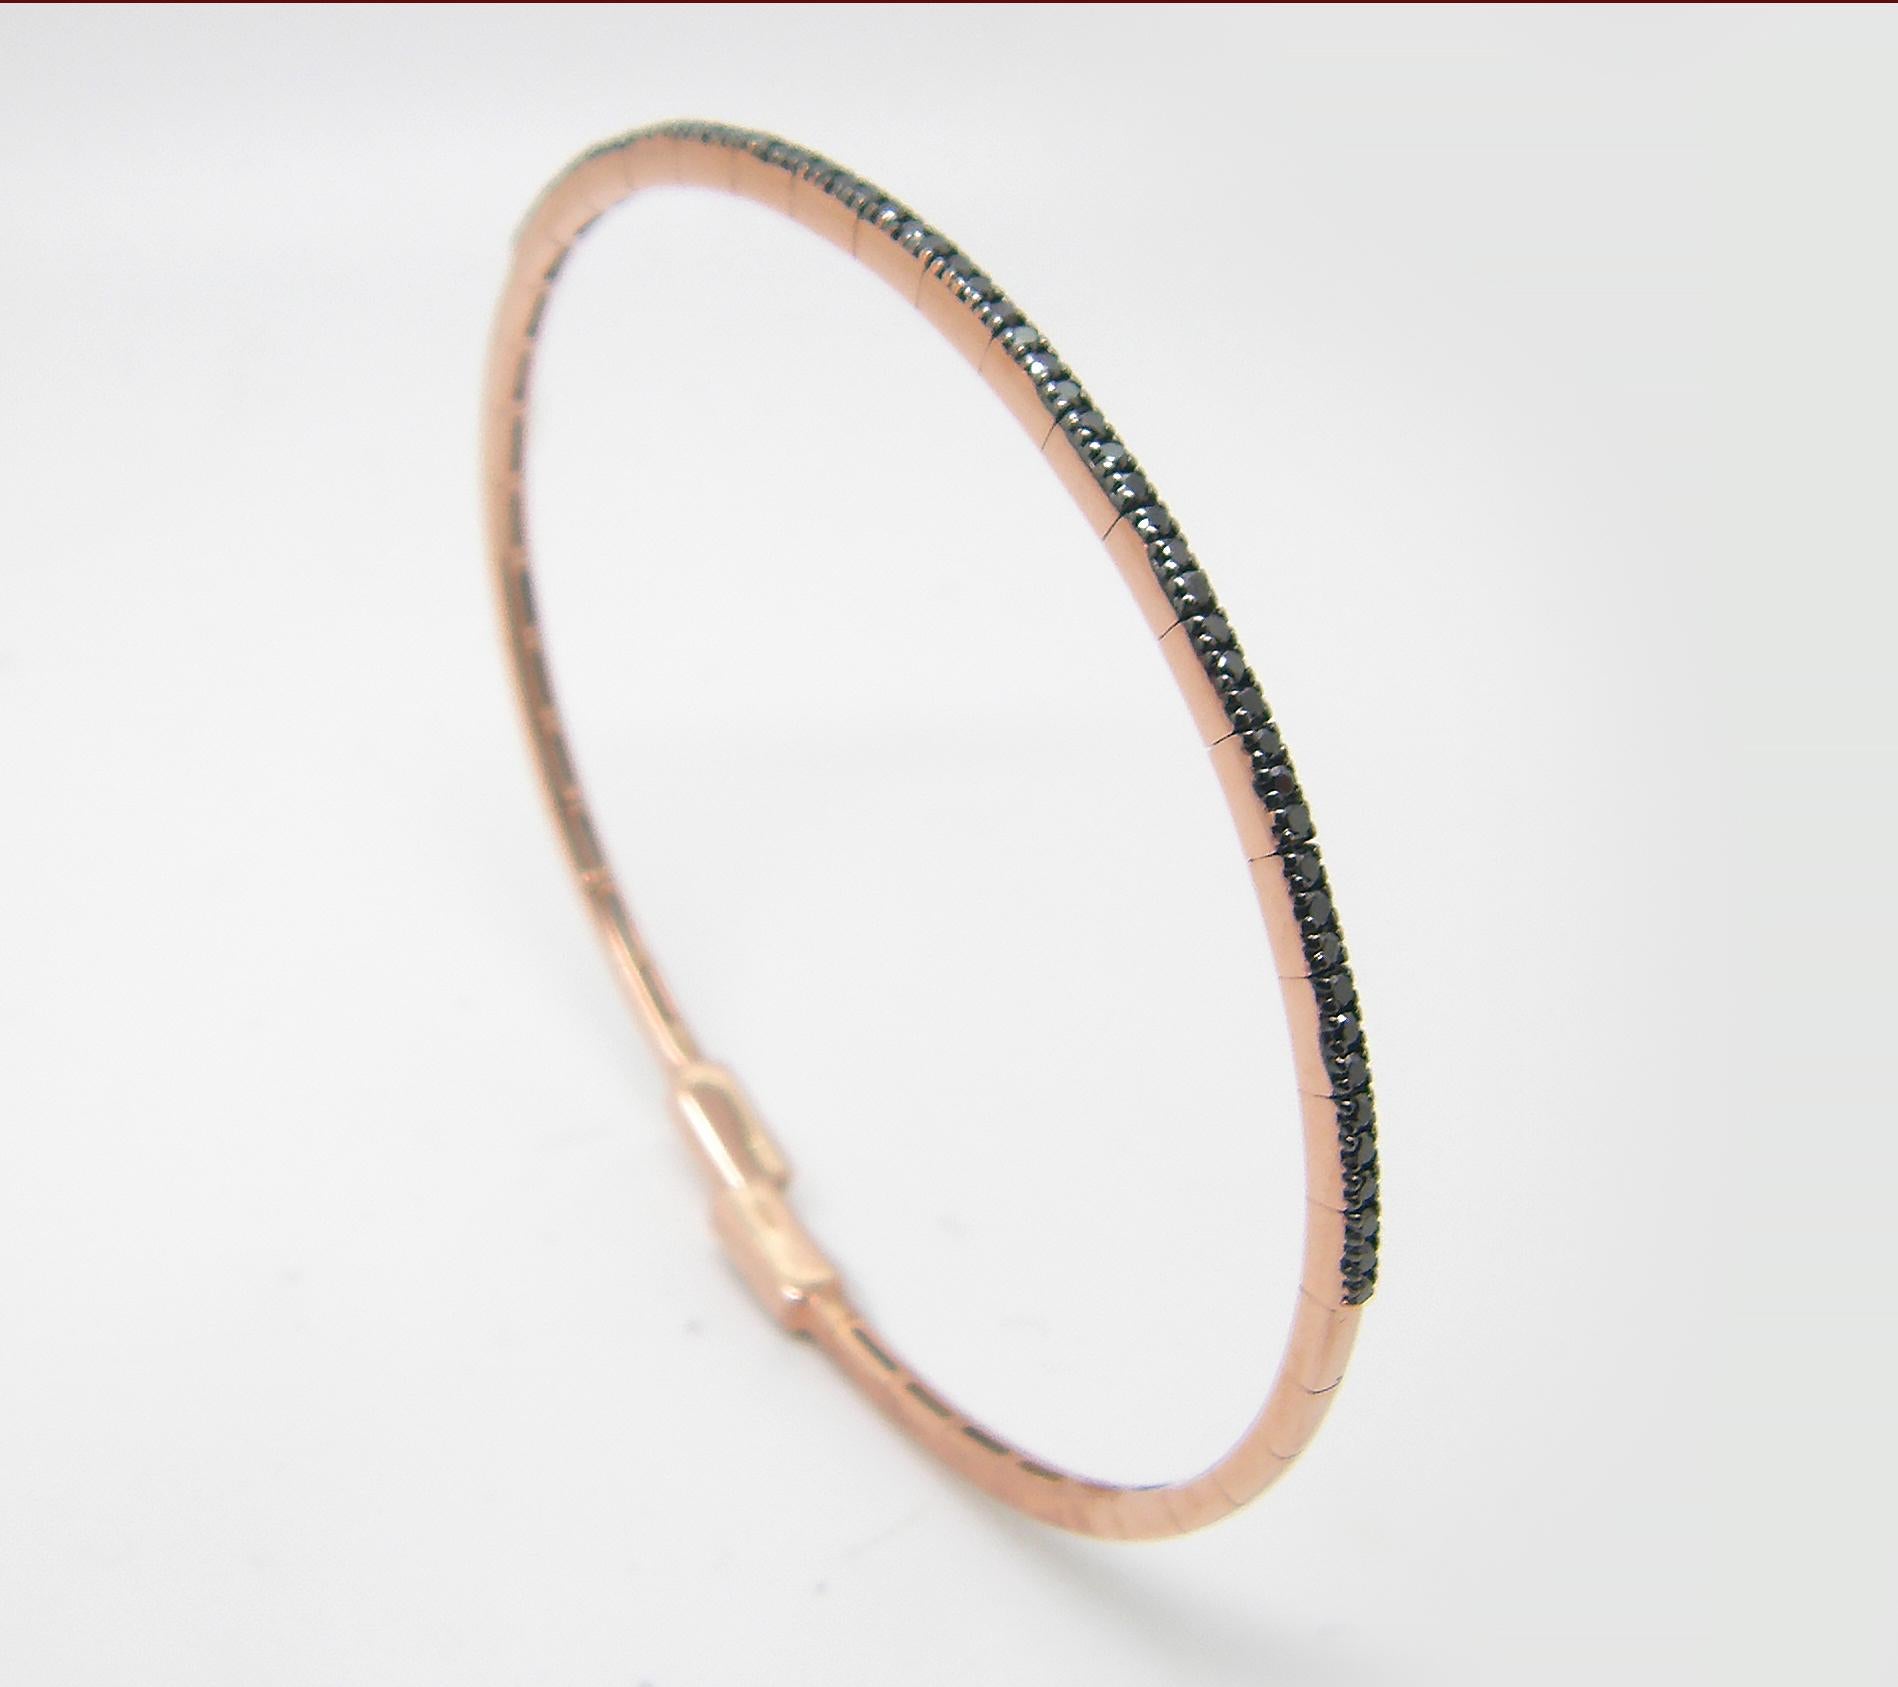 S.Georgios designer thin tennis bracelet bangle in solid rose gold 18 karat and all handmade. The elegant Bracelet for everyday wear is custom made and has brilliant-cut black diamonds total weight of 0.52 Carat. The gorgeous bangle has black